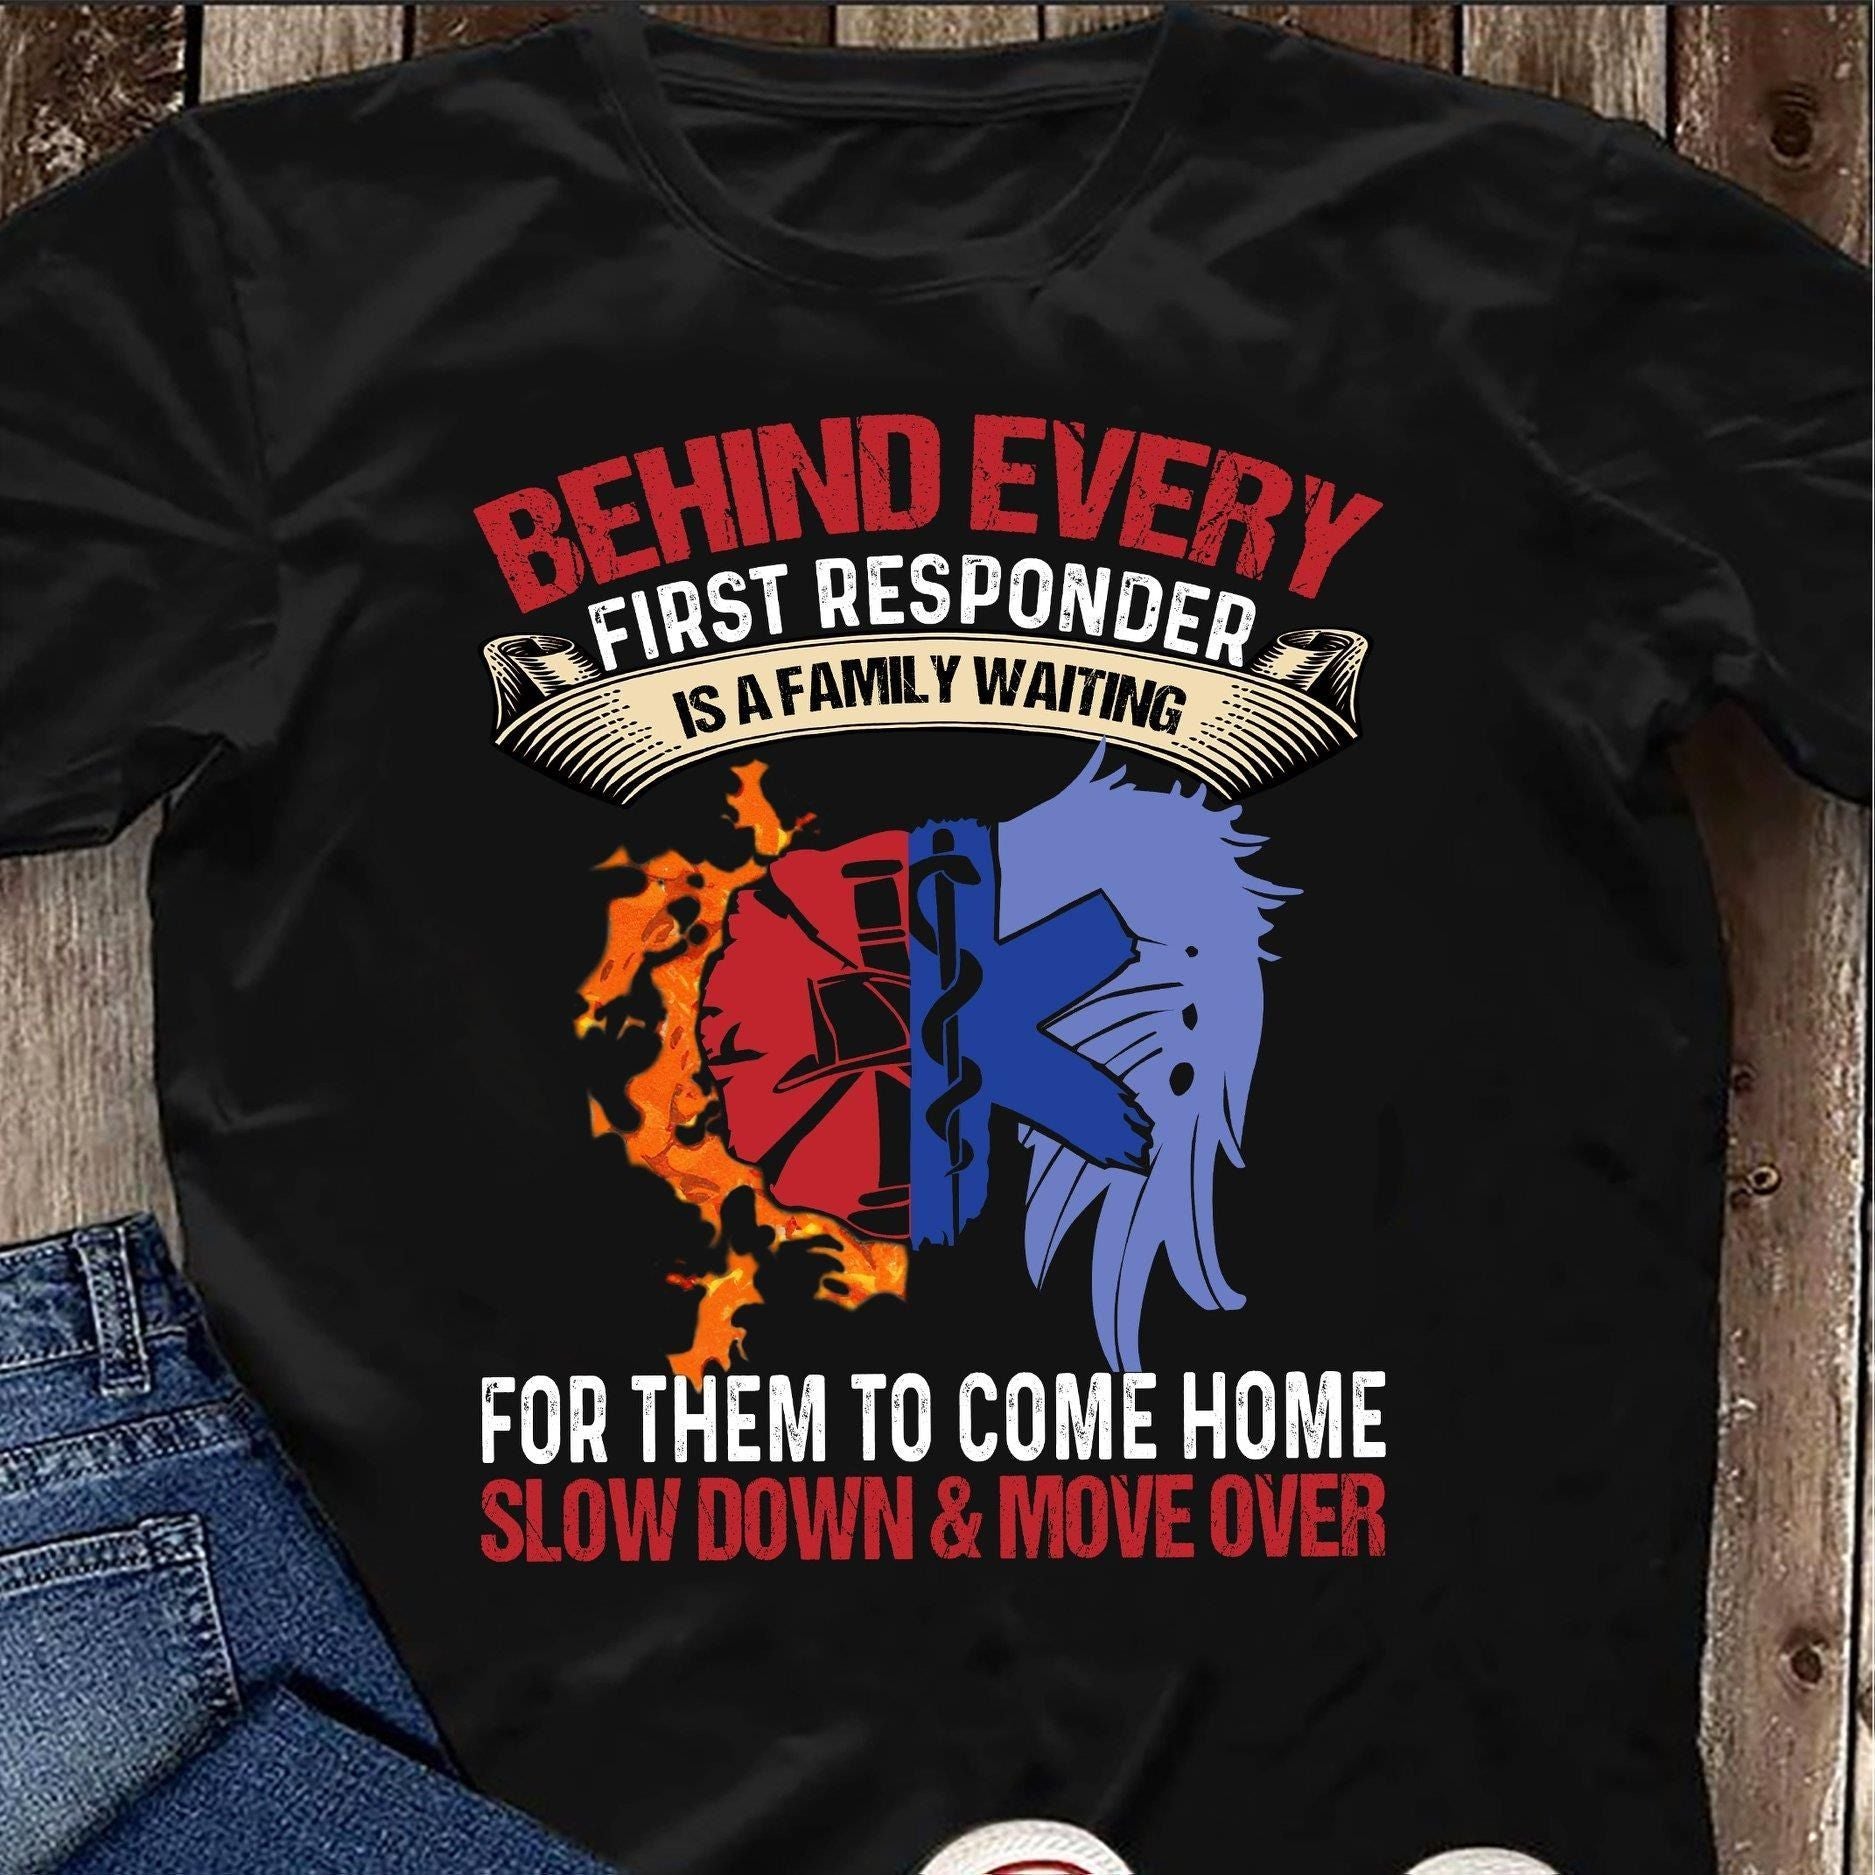 PresentsPrints, Firefighter Emergency Behind Every first responder is a family waiting for them to come home Slow Down and Move over Firefighter T-Shirt